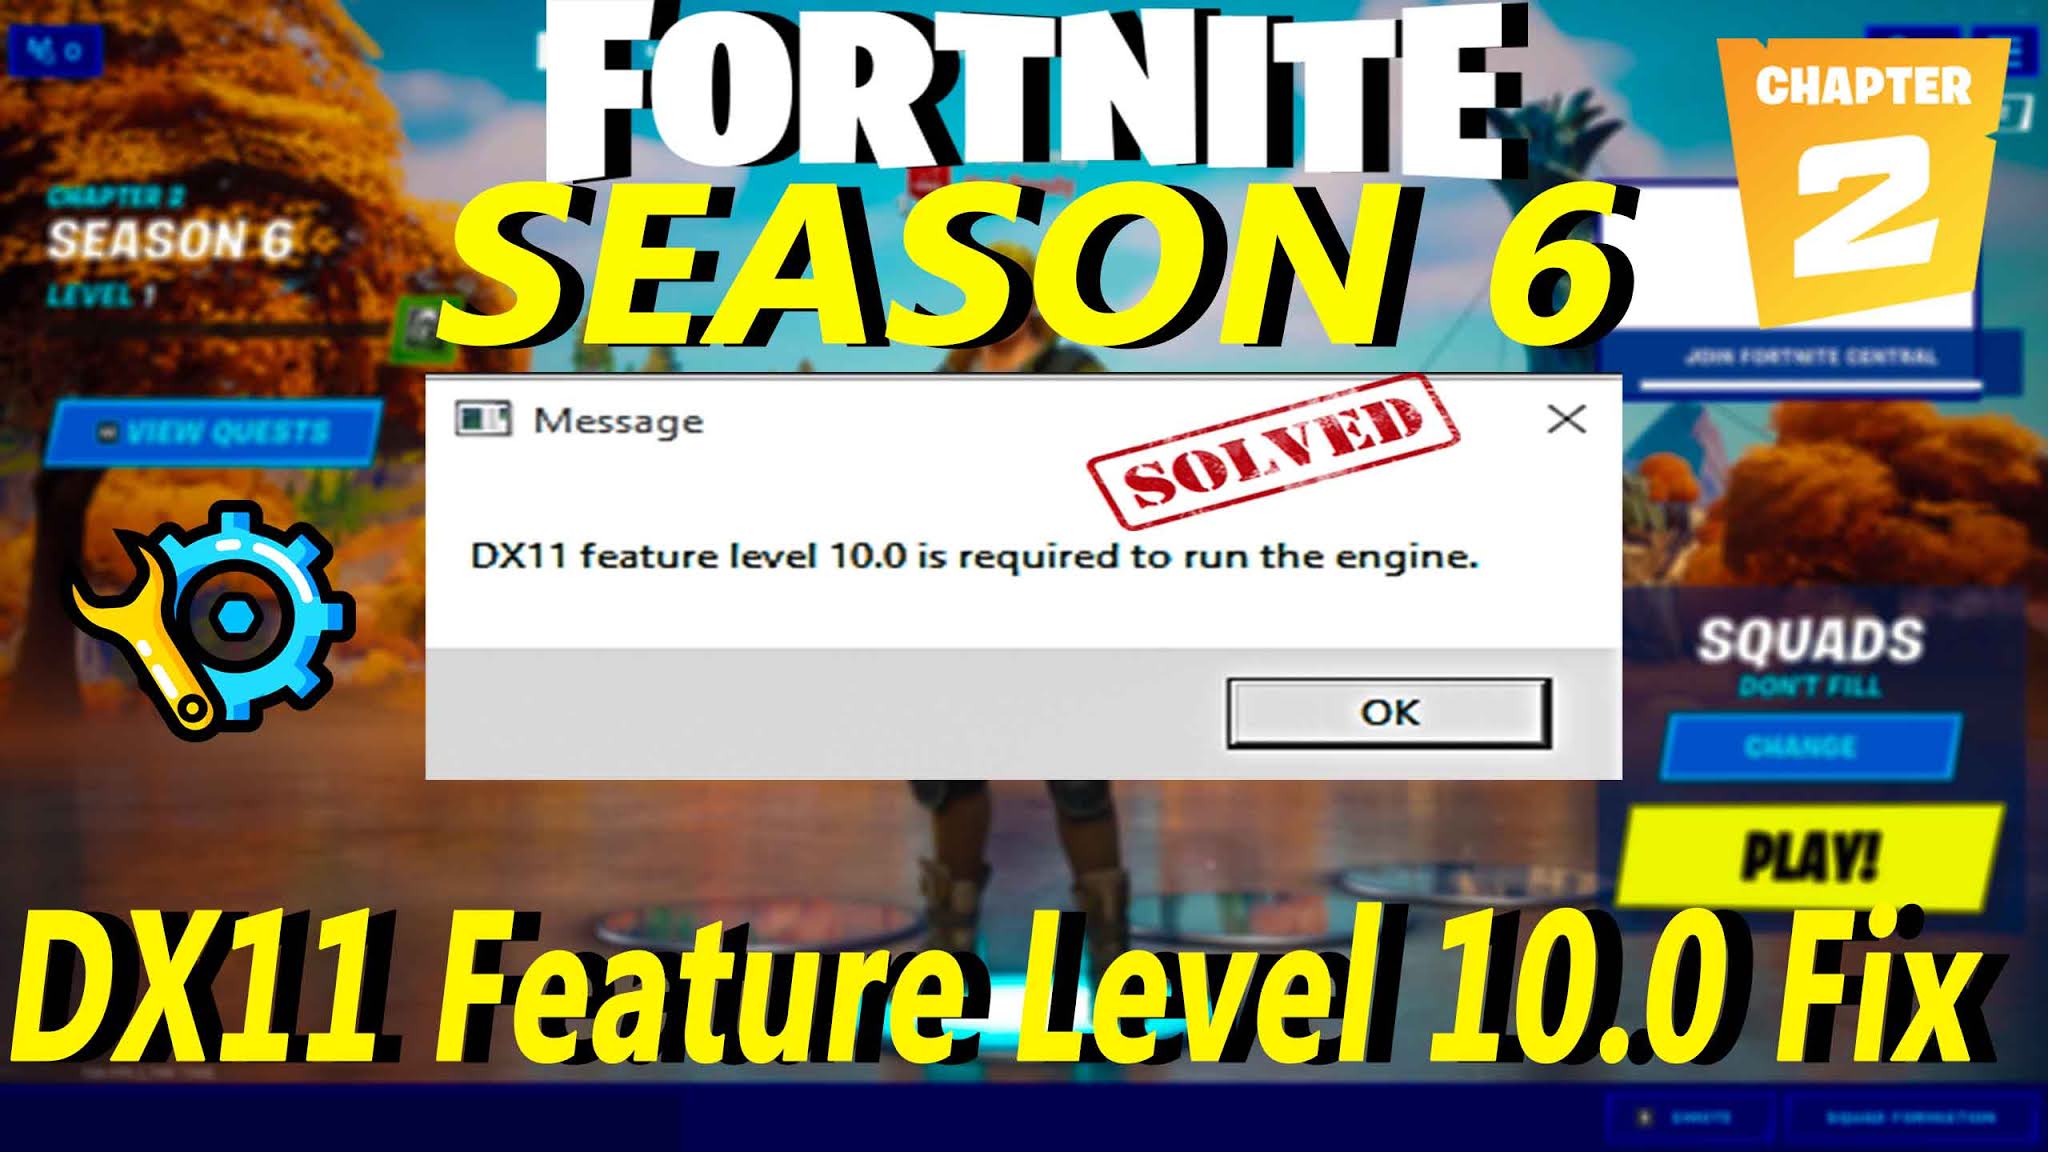 Dx11 feature Level 10.0 is required to Run the engine как исправить. Dx11 feature Level 10.0 is required to Run the engine. Message dx11 feature Level 100 is required to Run the engine что за ошибка. Dx11 feature